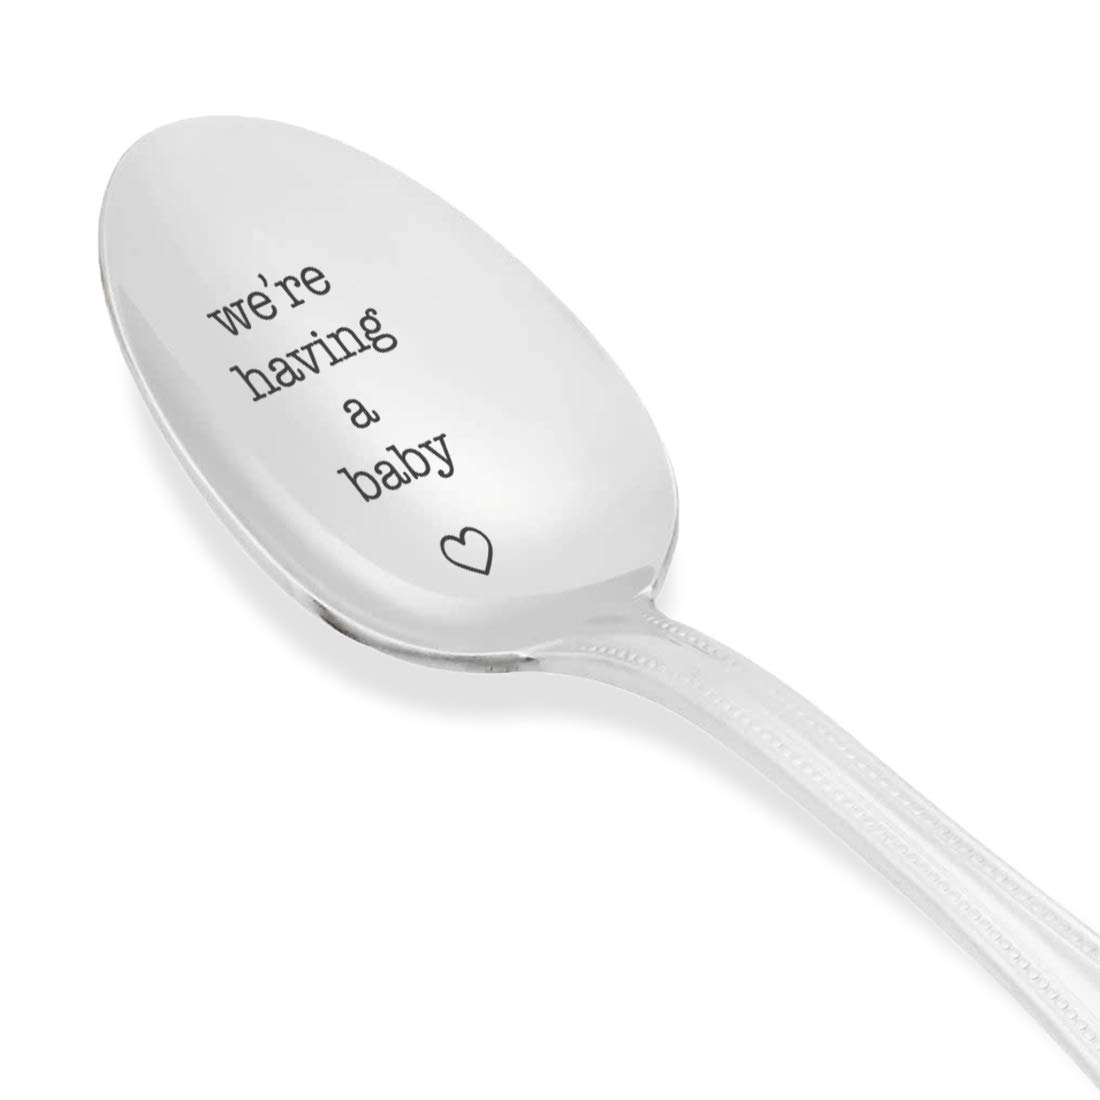 We're having a baby Engraved Spoon Surprise Pregnancy Gift for New Birth Reveal Baby Announcement Spoon -We're expecting its a boy or a girl-Special Unique Gift-Stainless Steel Teaspoon 7 inches